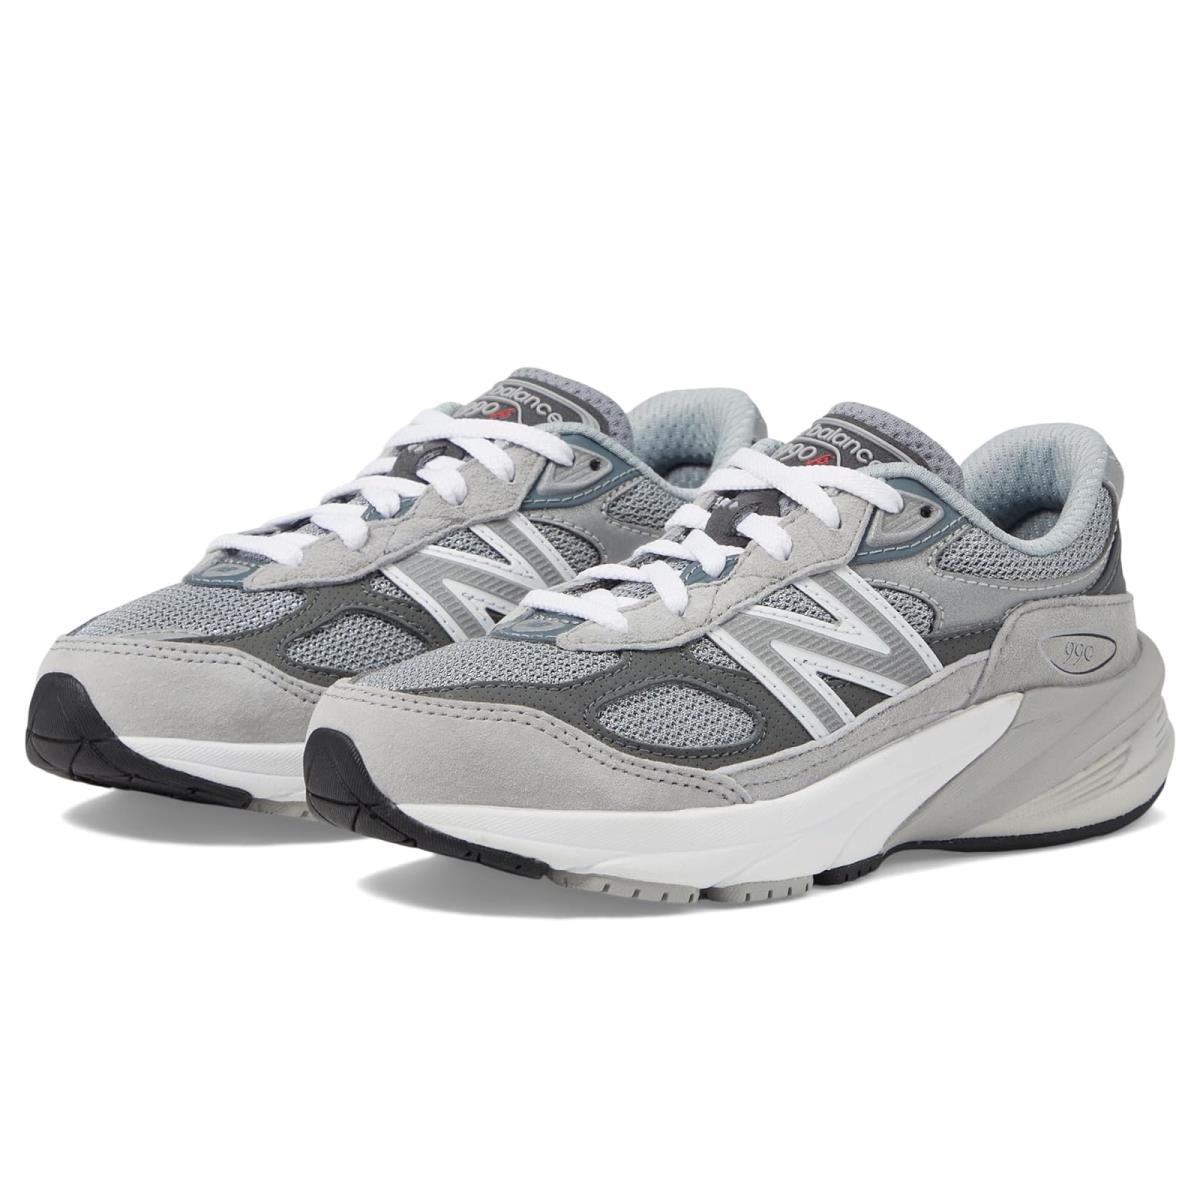 Boy`s Sneakers Athletic Shoes New Balance Kids 990v6 Little Kid Grey/Silver